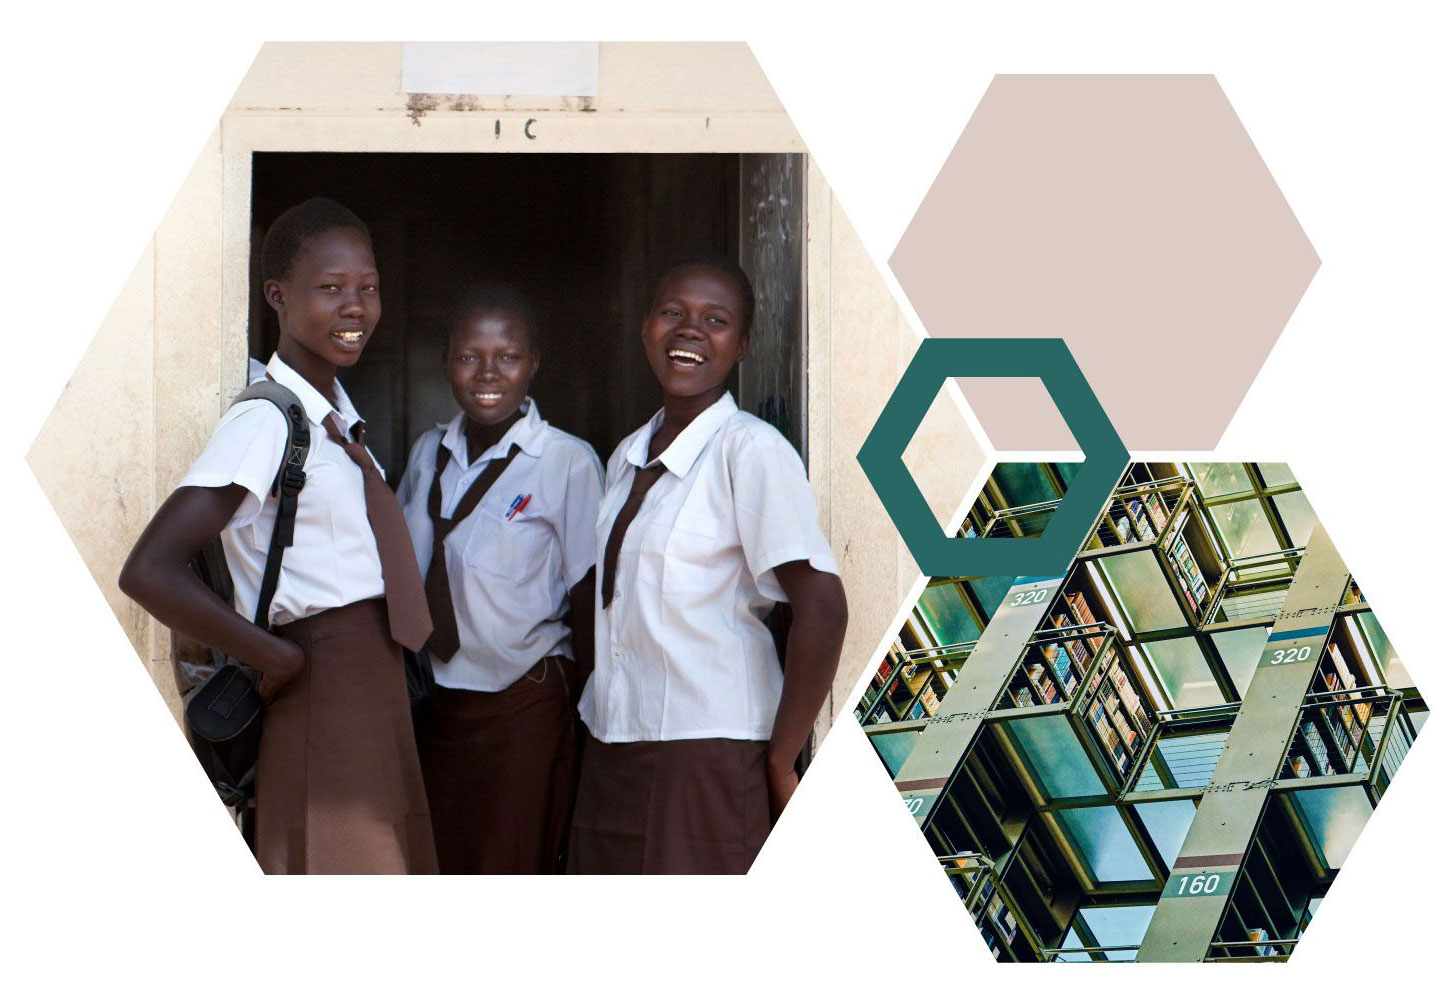 Hexagon collage with image girls standing in front of school and an image of several floors of a library